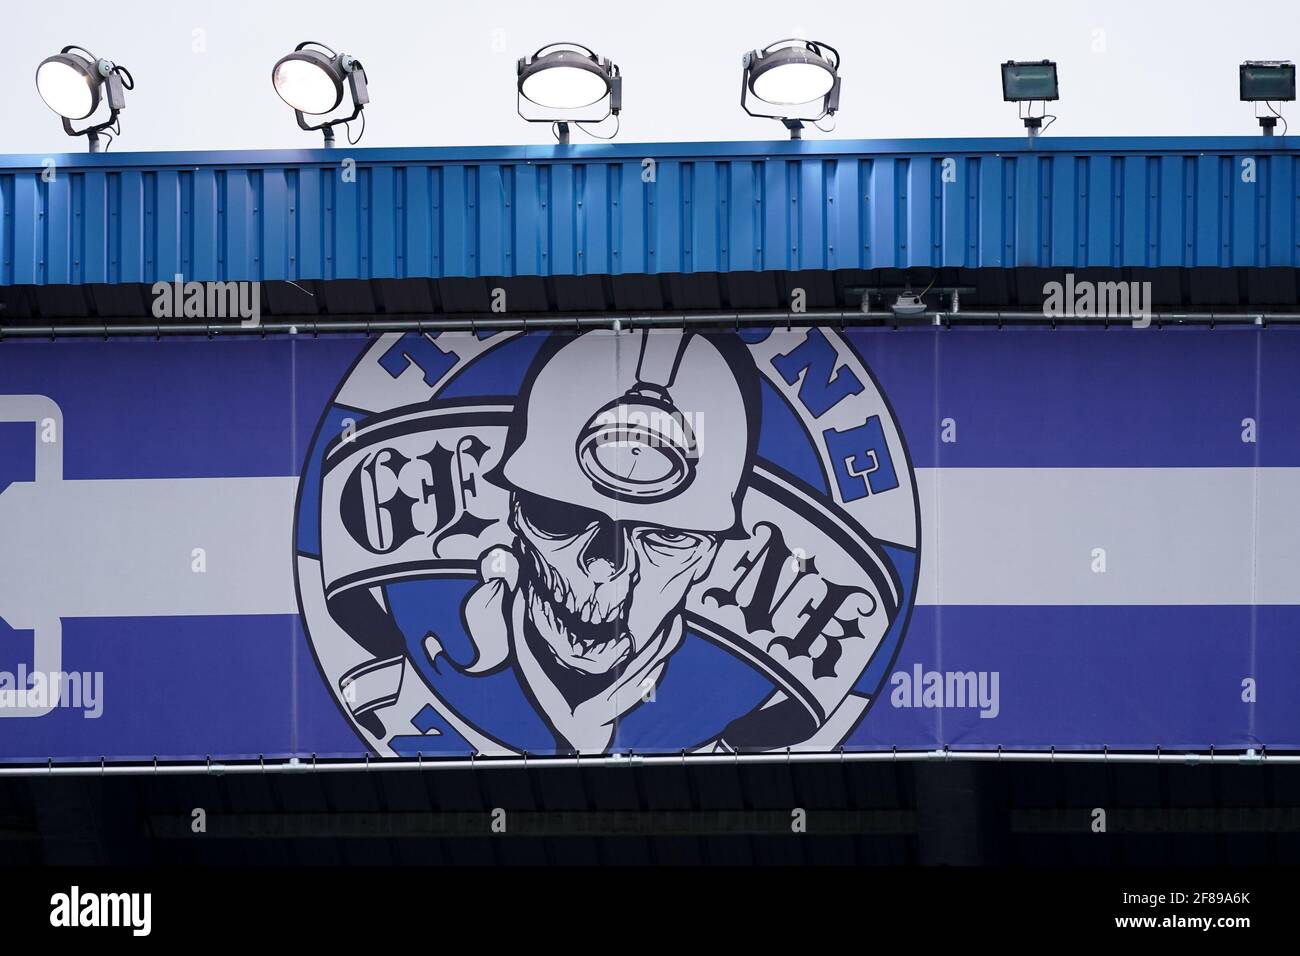 GENK, BELGIUM - APRIL 11: KRC Genk banner of a mineworker attached to the stadiium roof during the Jupiler Pro League match between KRC Genk and Sint- Stock Photo